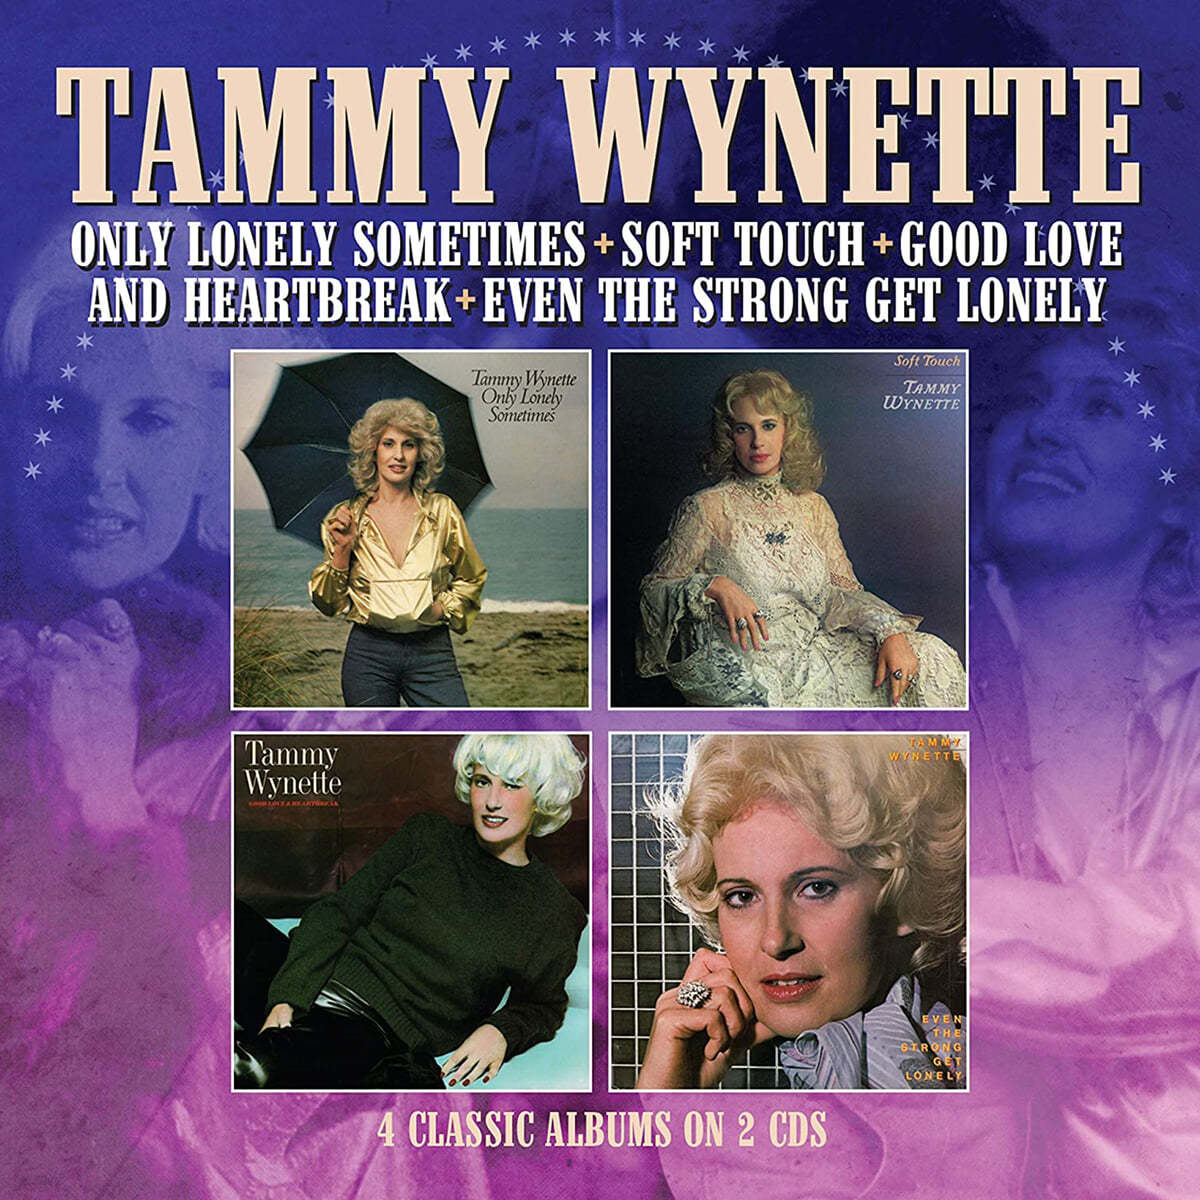 Tammy Wynette (태미 와이넷) - Only Lonely Sometimes + Soft Touch + Good Love And Heartbreak + Even The Strong Get Lonely 